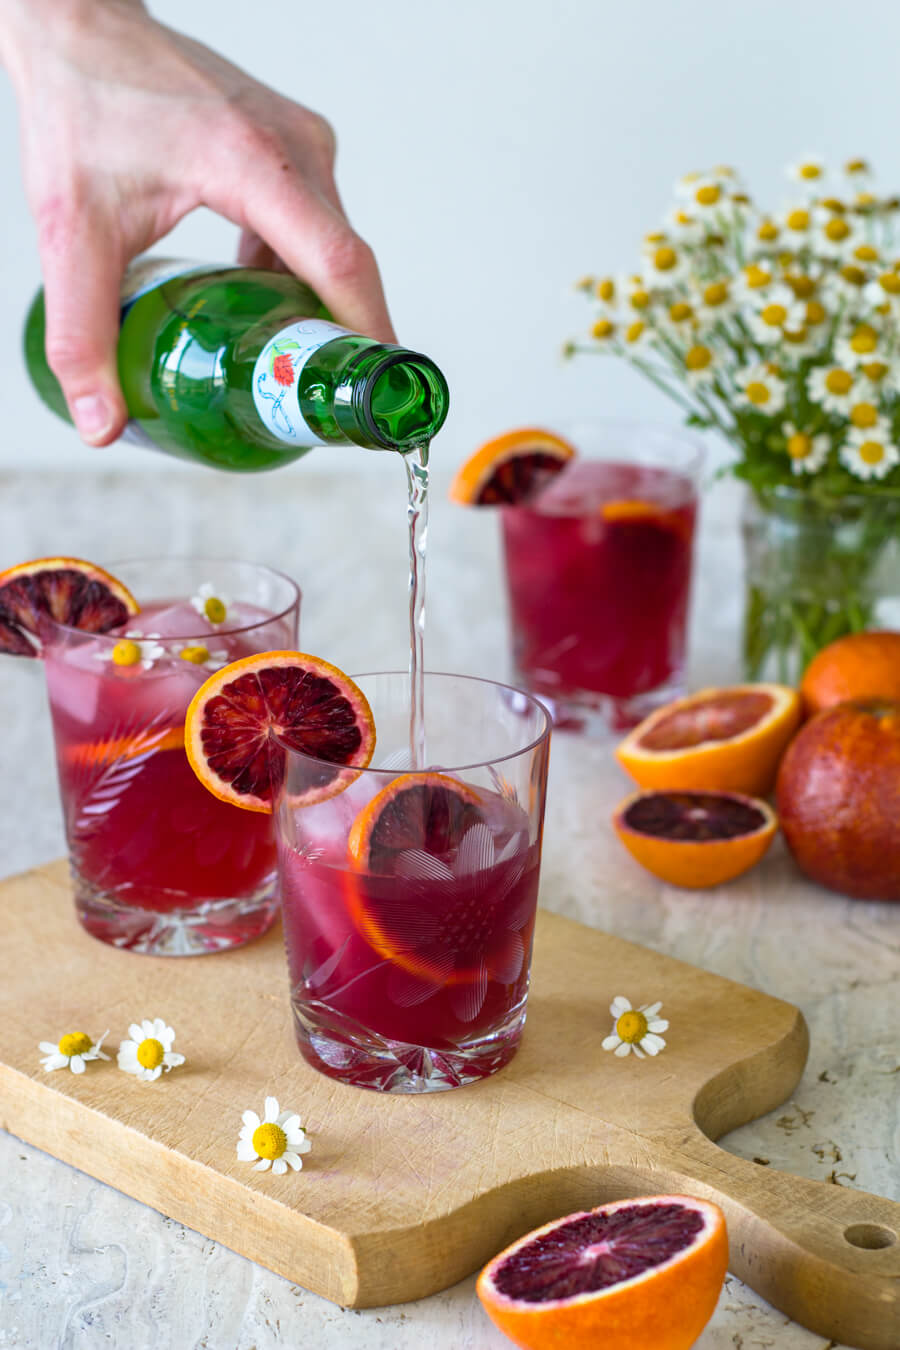 Blood Orange Moscow Mules | Winter Citrus Cocktail Recipes from Entertaining Blog @cydconverse